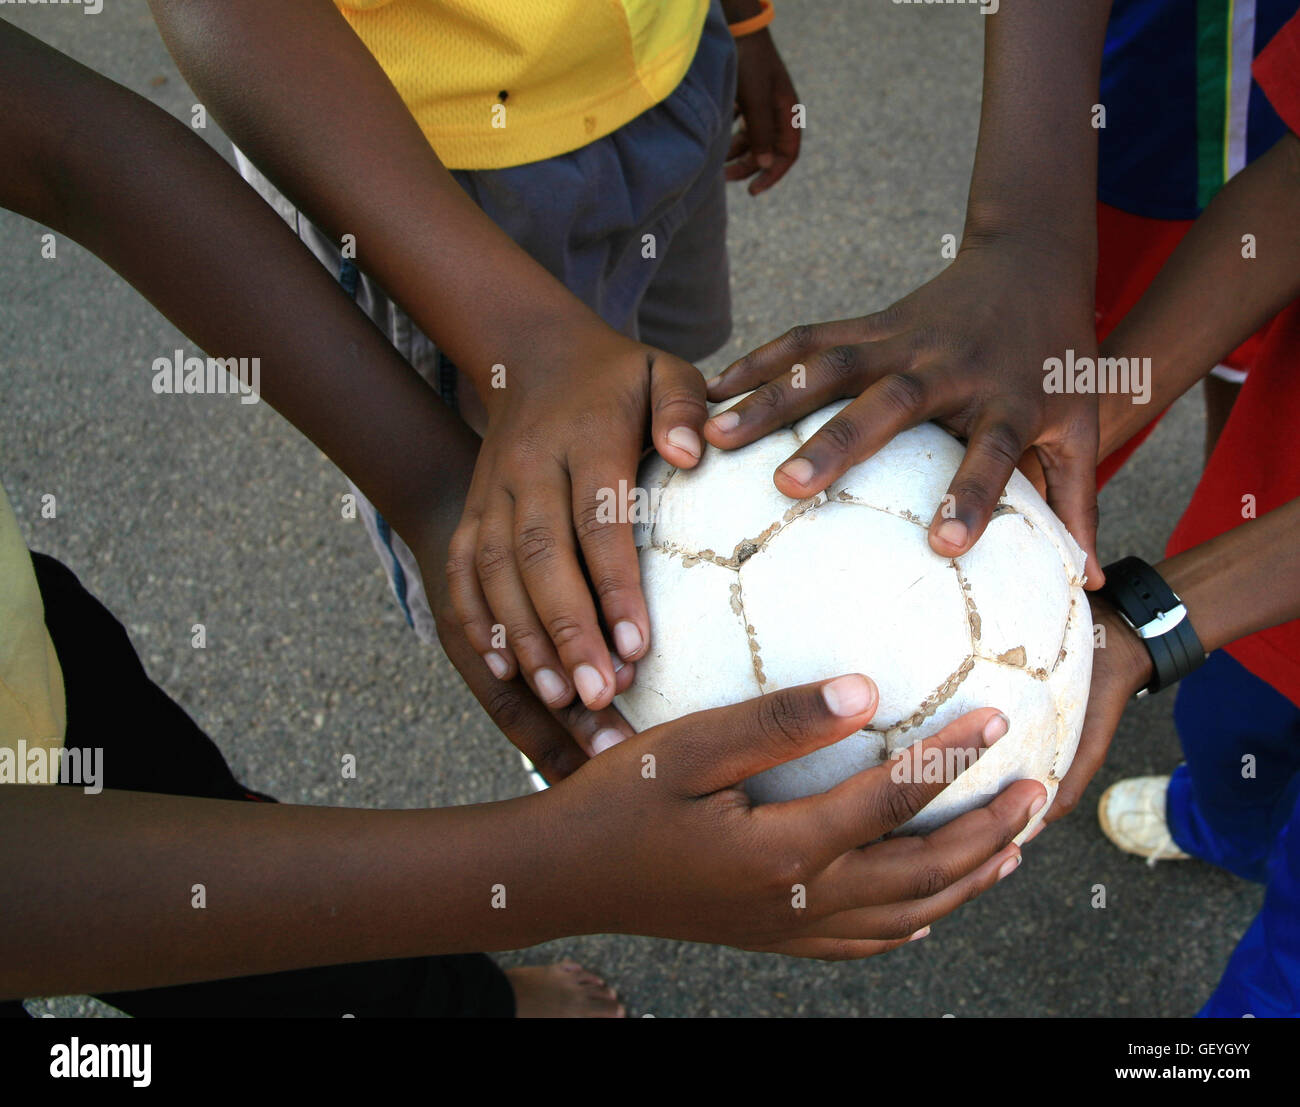 Children's hands holding an old soccerball, South Africa Stock Photo